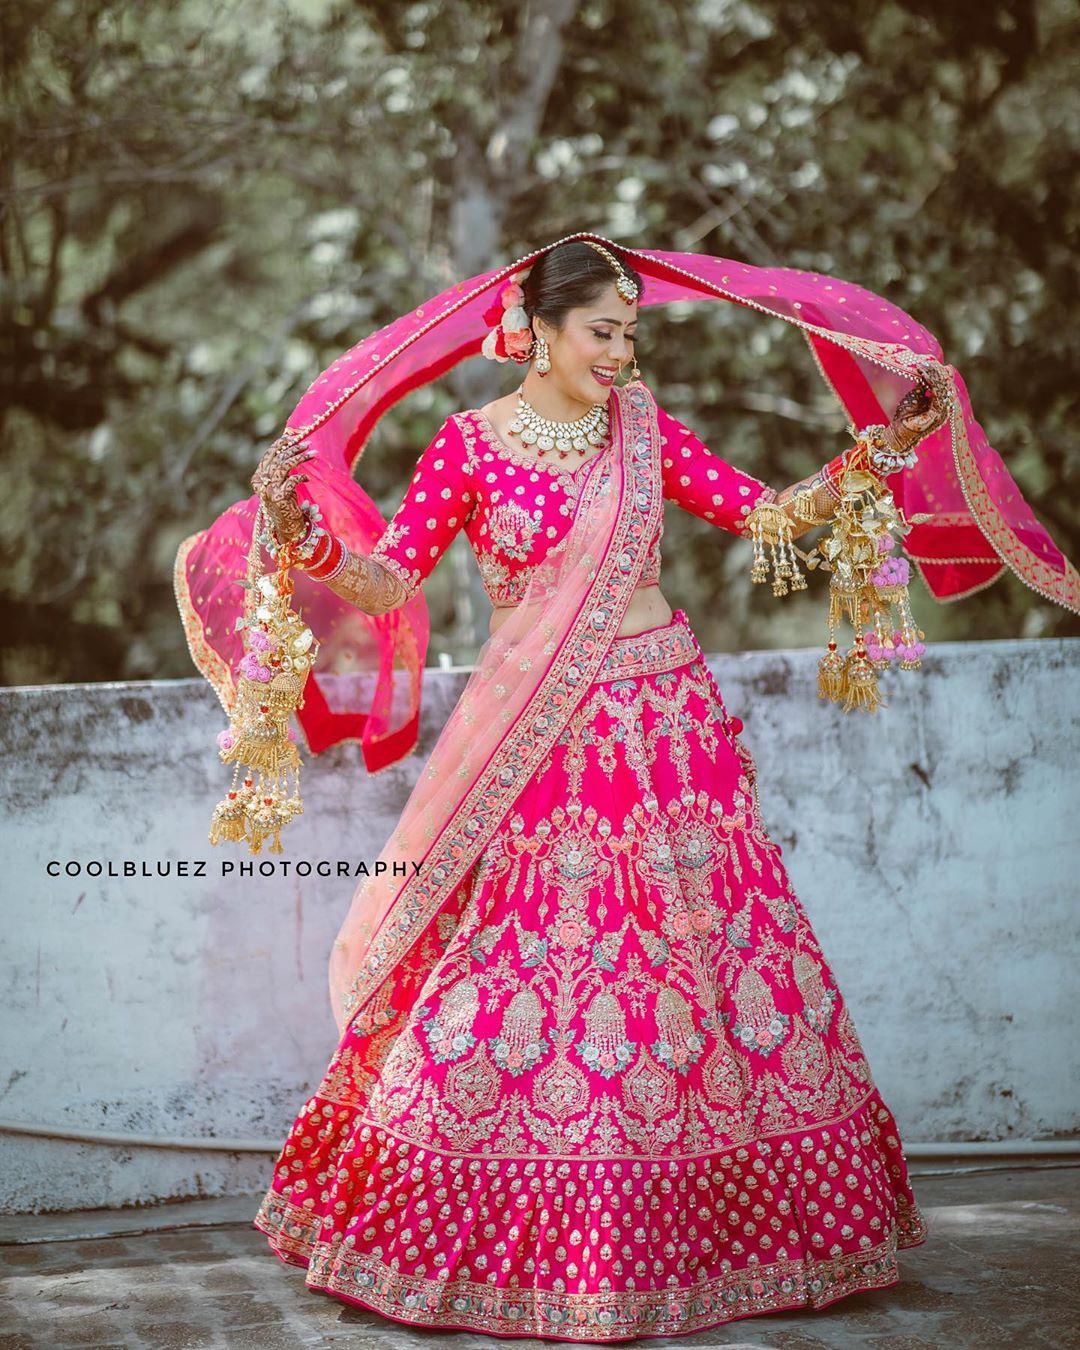 75487 rent a lehenga coolbluez photography declare yourself as a trendsetter